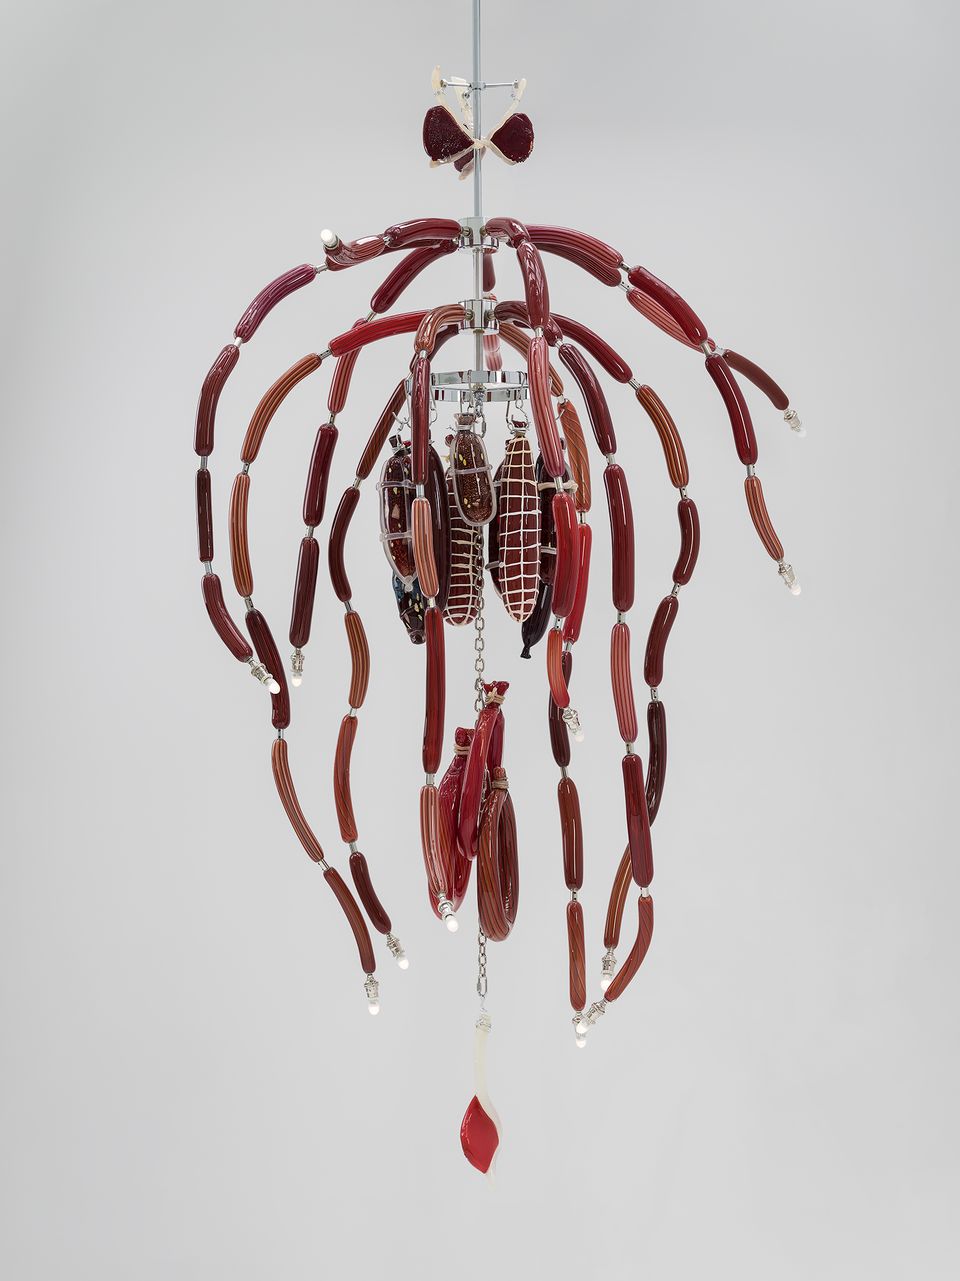 An artwork made of glass that looks like meat chandelier 